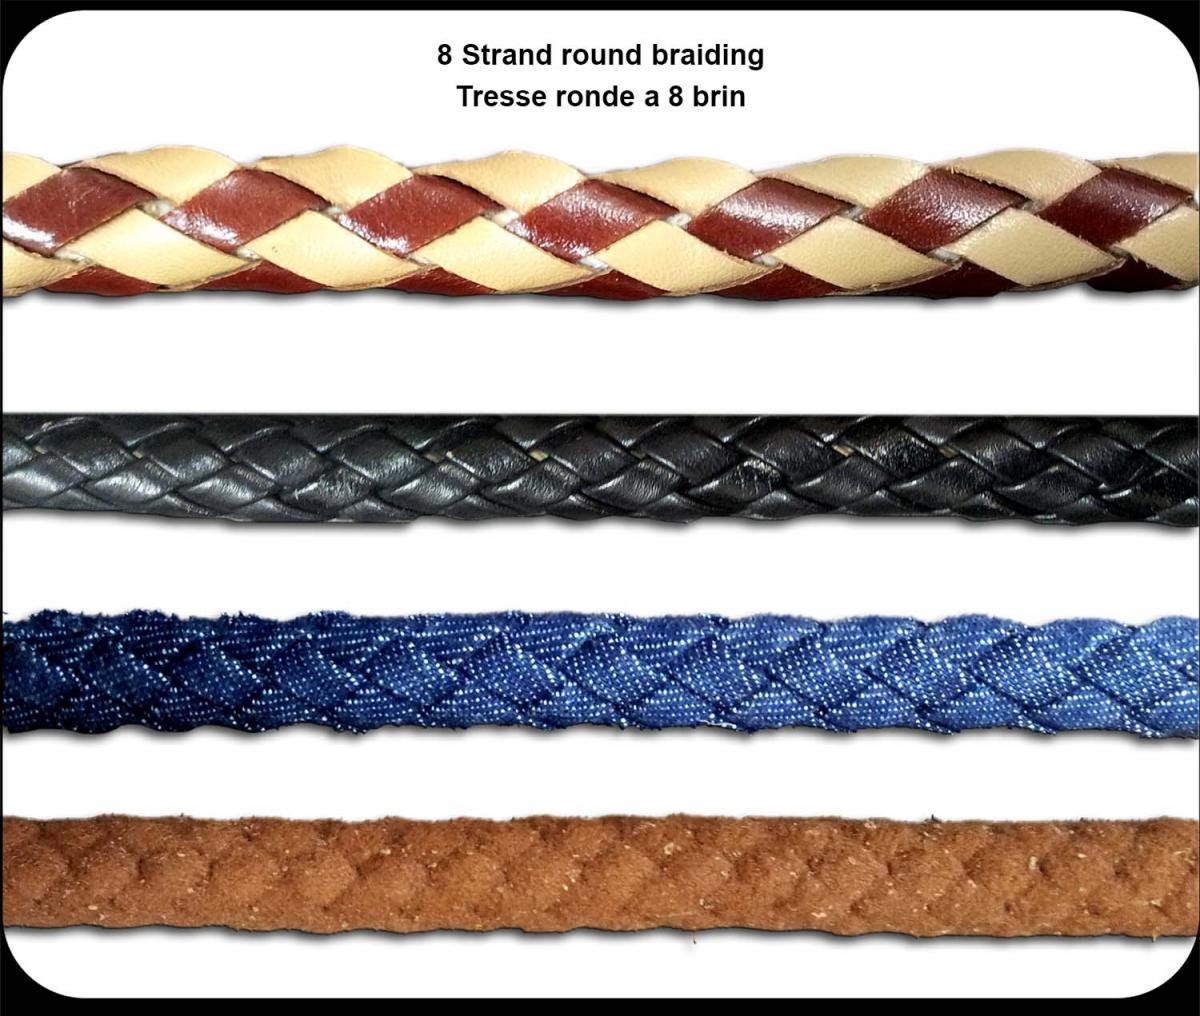 How to make a flat 4 strand round braid paracord bracelet tutorial | knot and loop style woe recommended tools and more. Braids